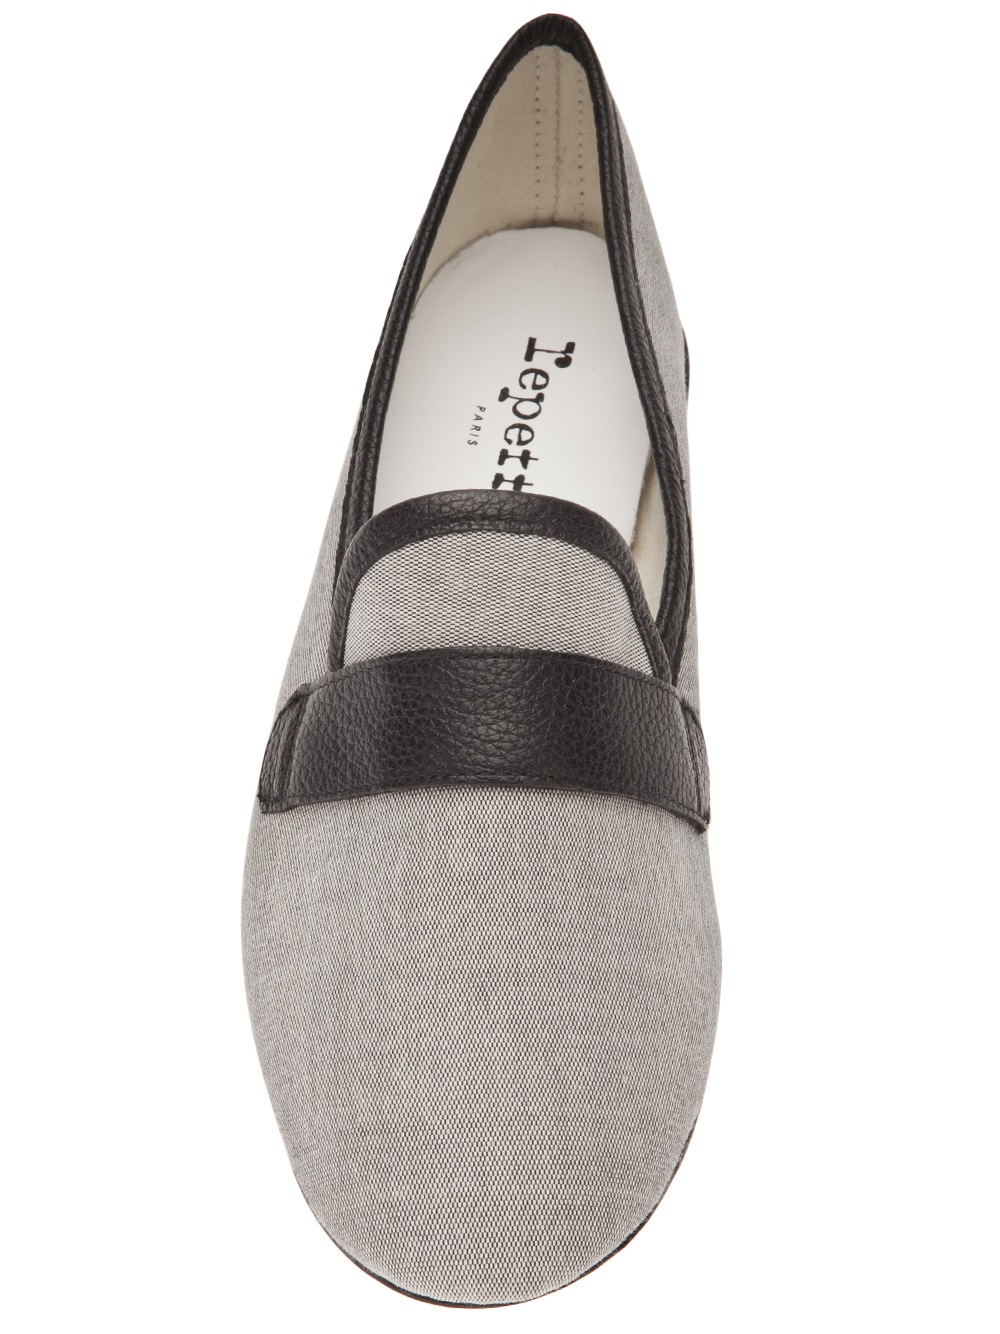 Lyst - Repetto Michael Loafer in Gray